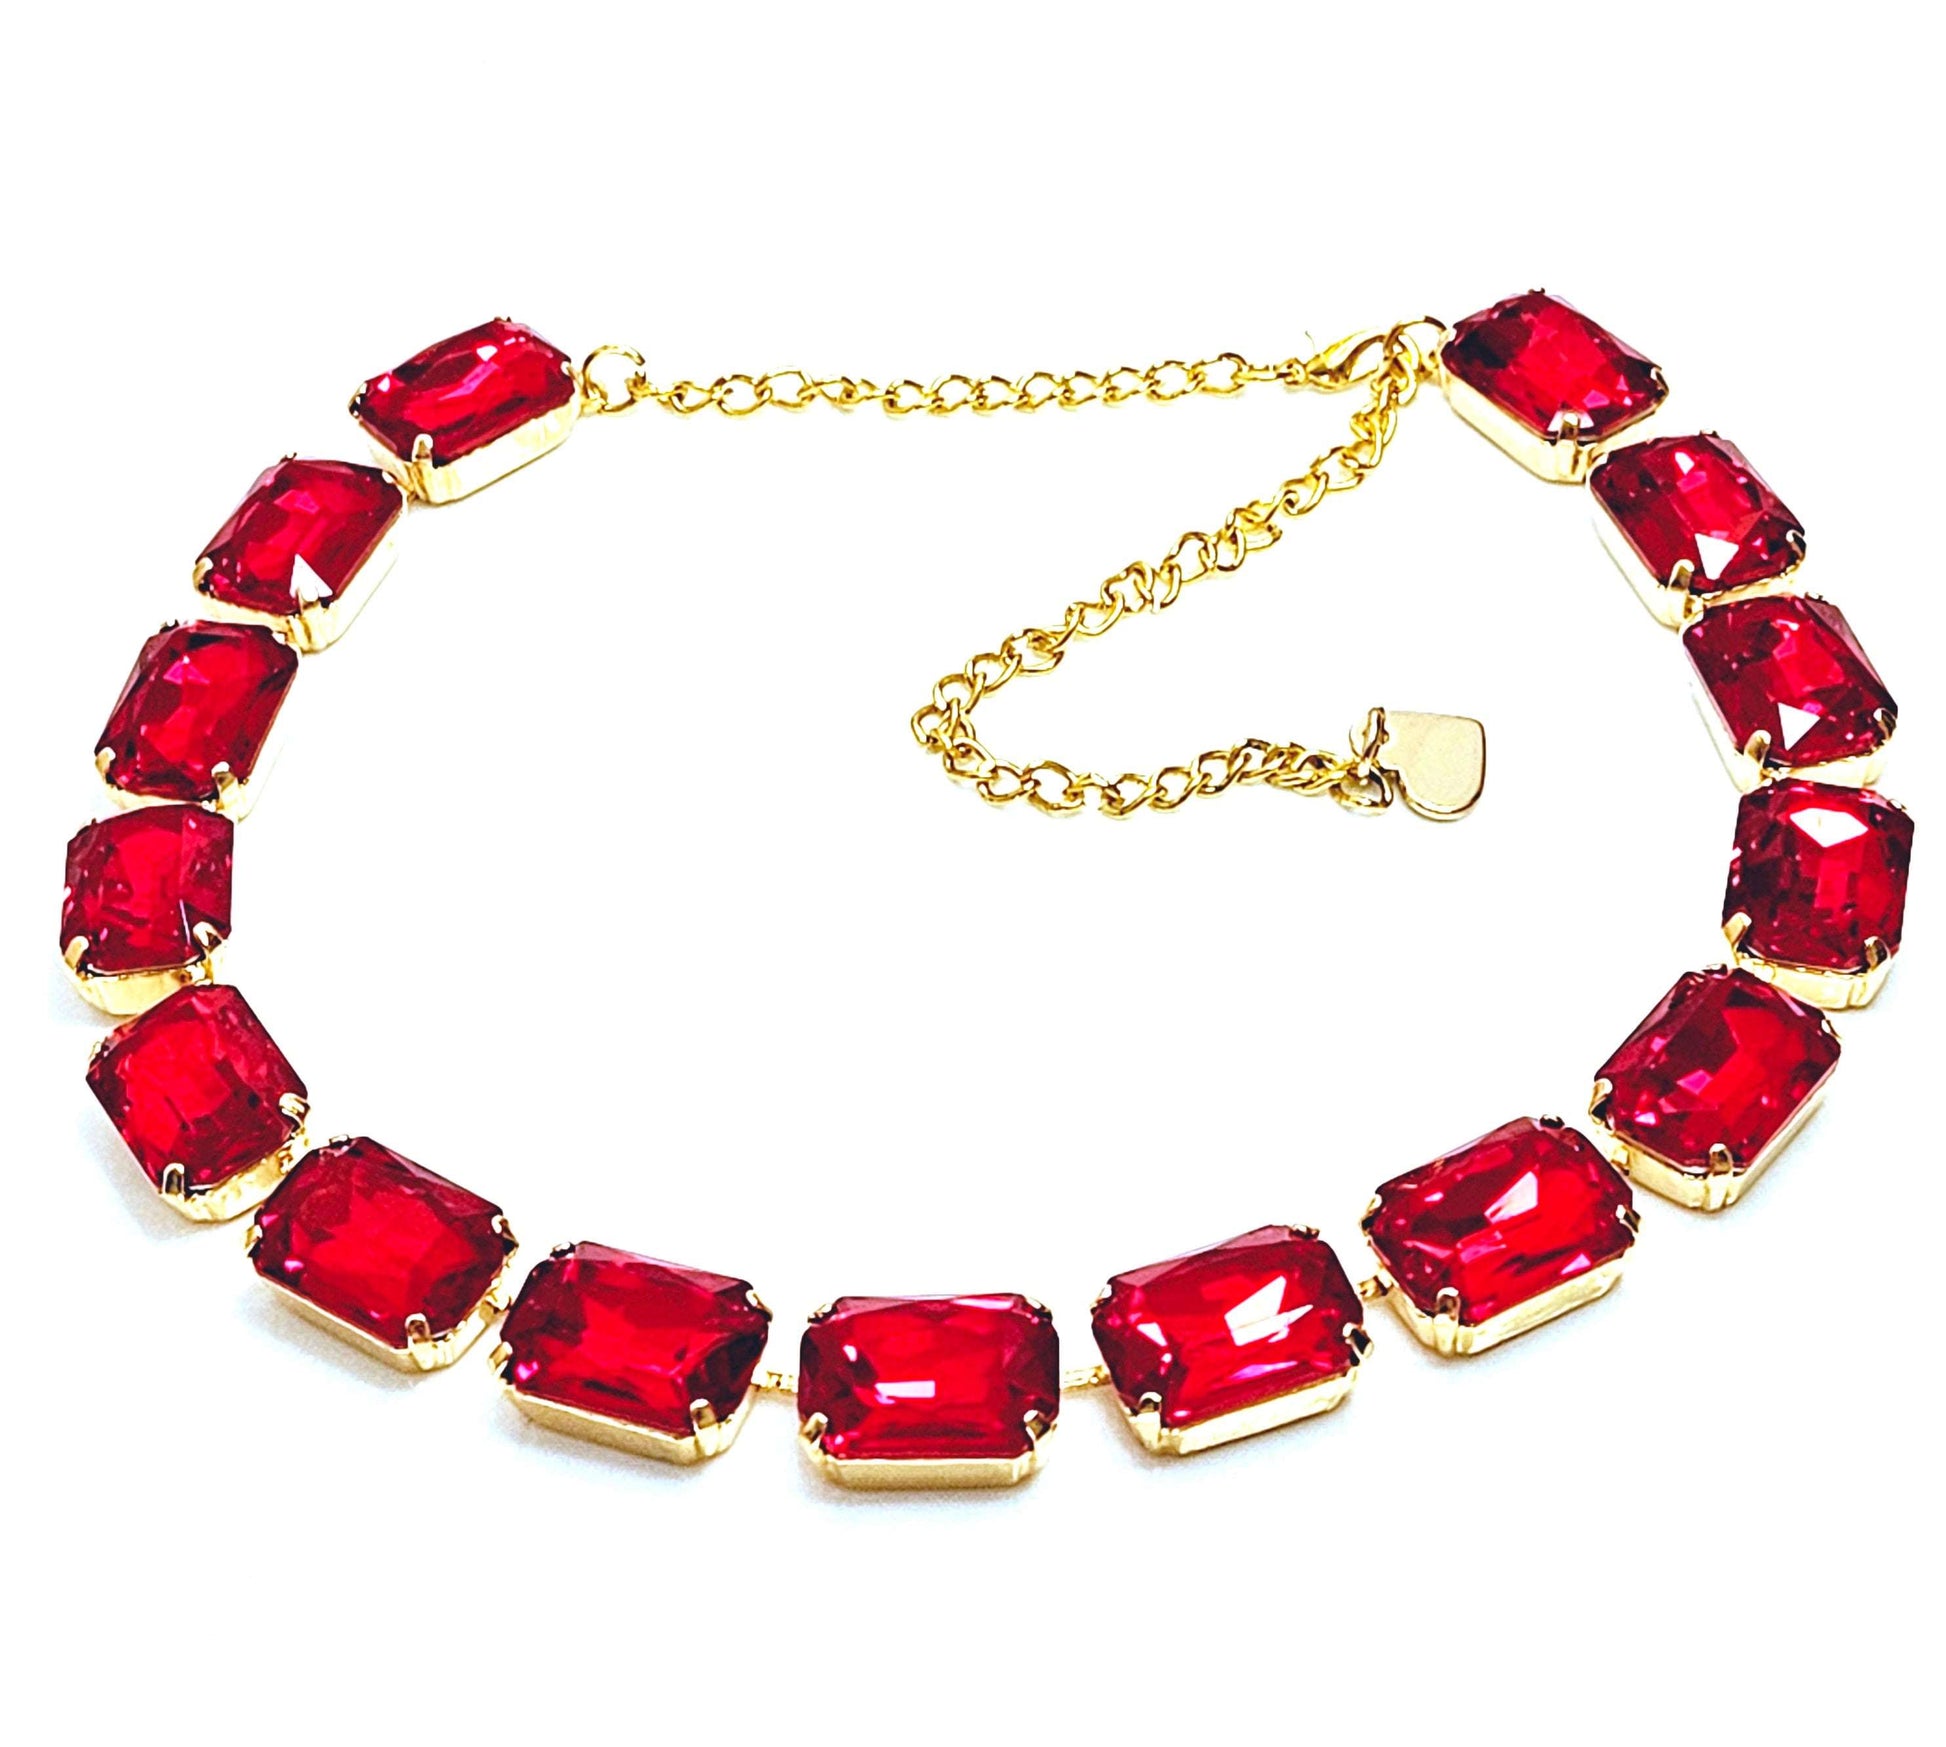 Red Green Georgian Collet Necklaces, Peach Crystal Choker, Anna Wintour Style, Xmas Colours, Emerald Riviere Necklace, Necklaces for Women